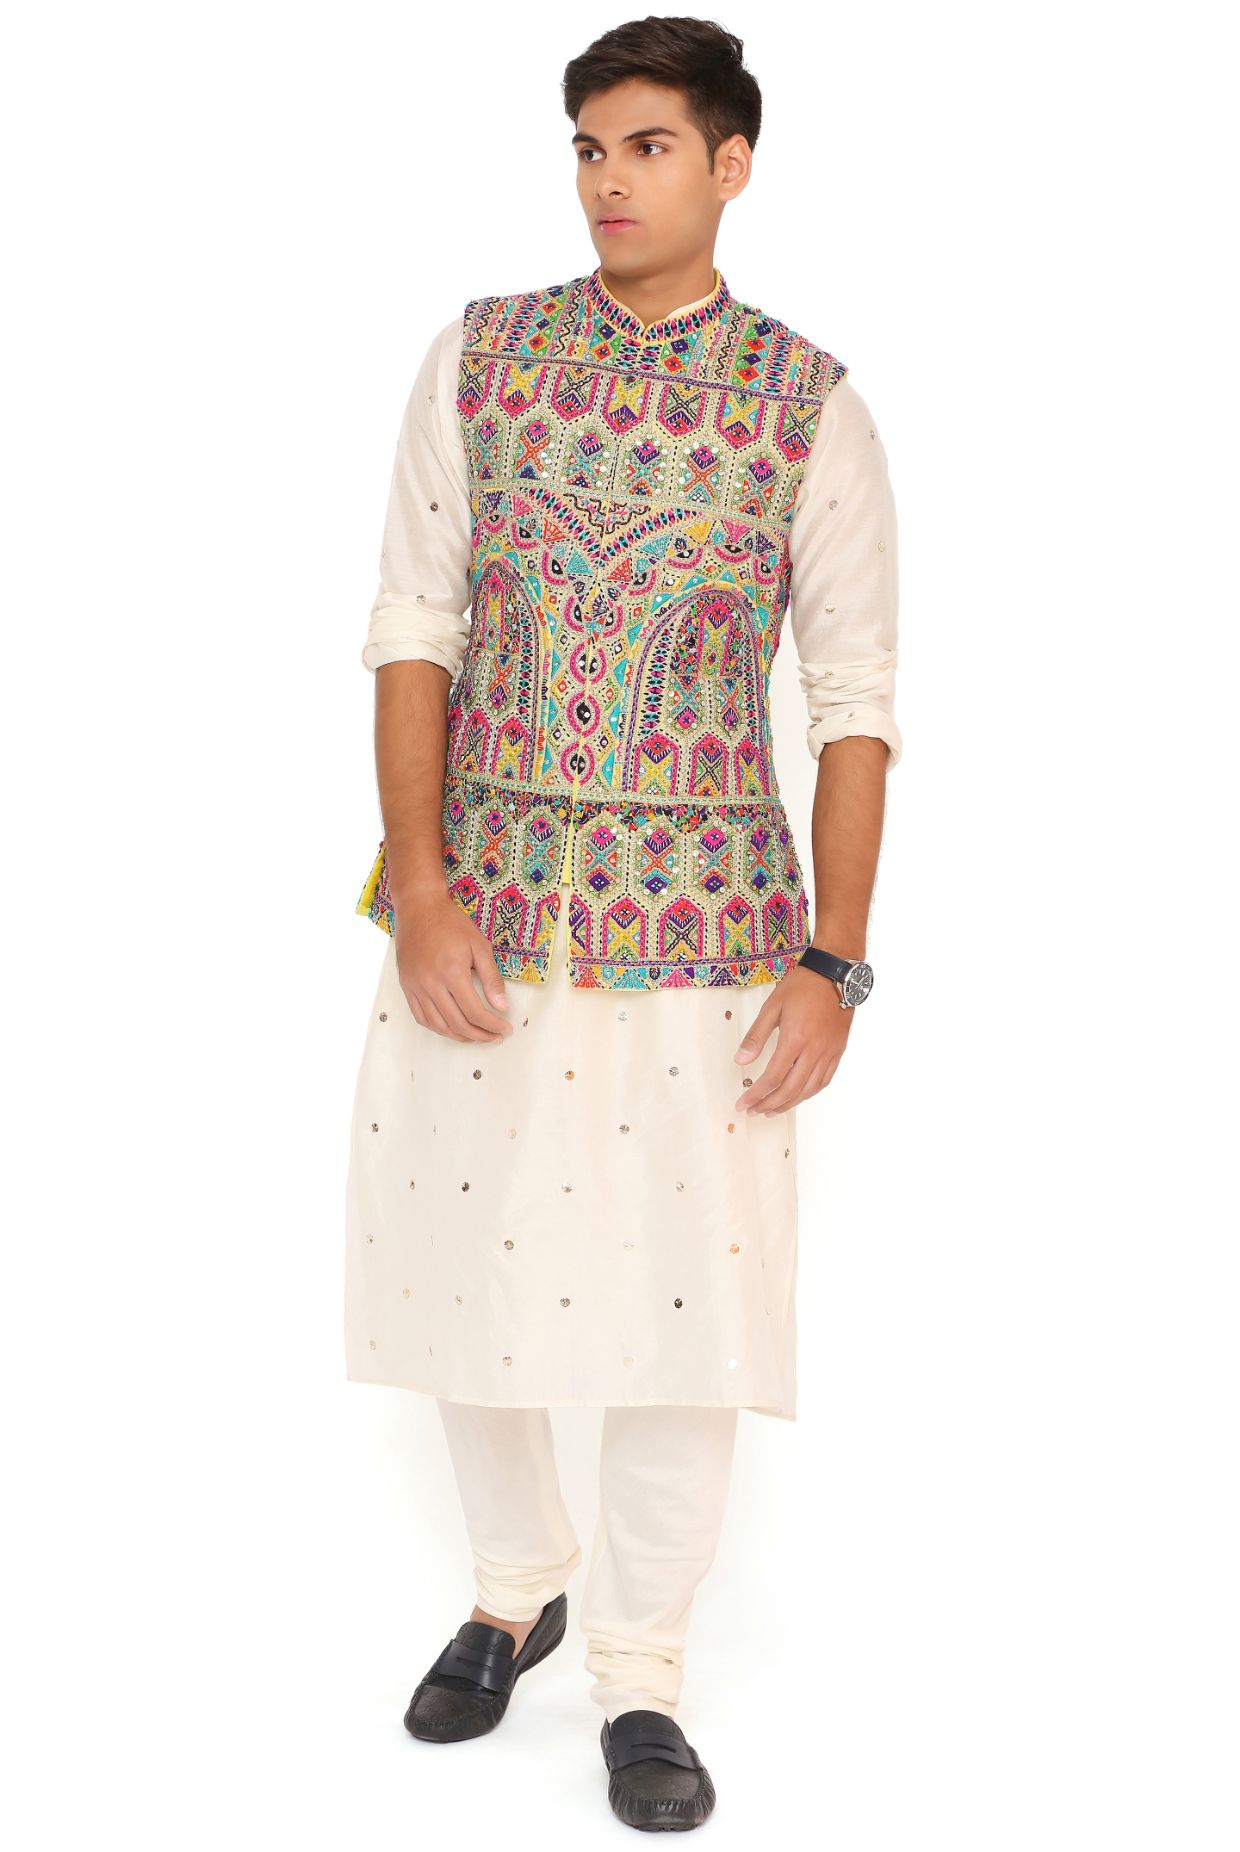 Buy PS Men by Payal Singhal Blue Kurta with Off White Churidar - Set of 2  online